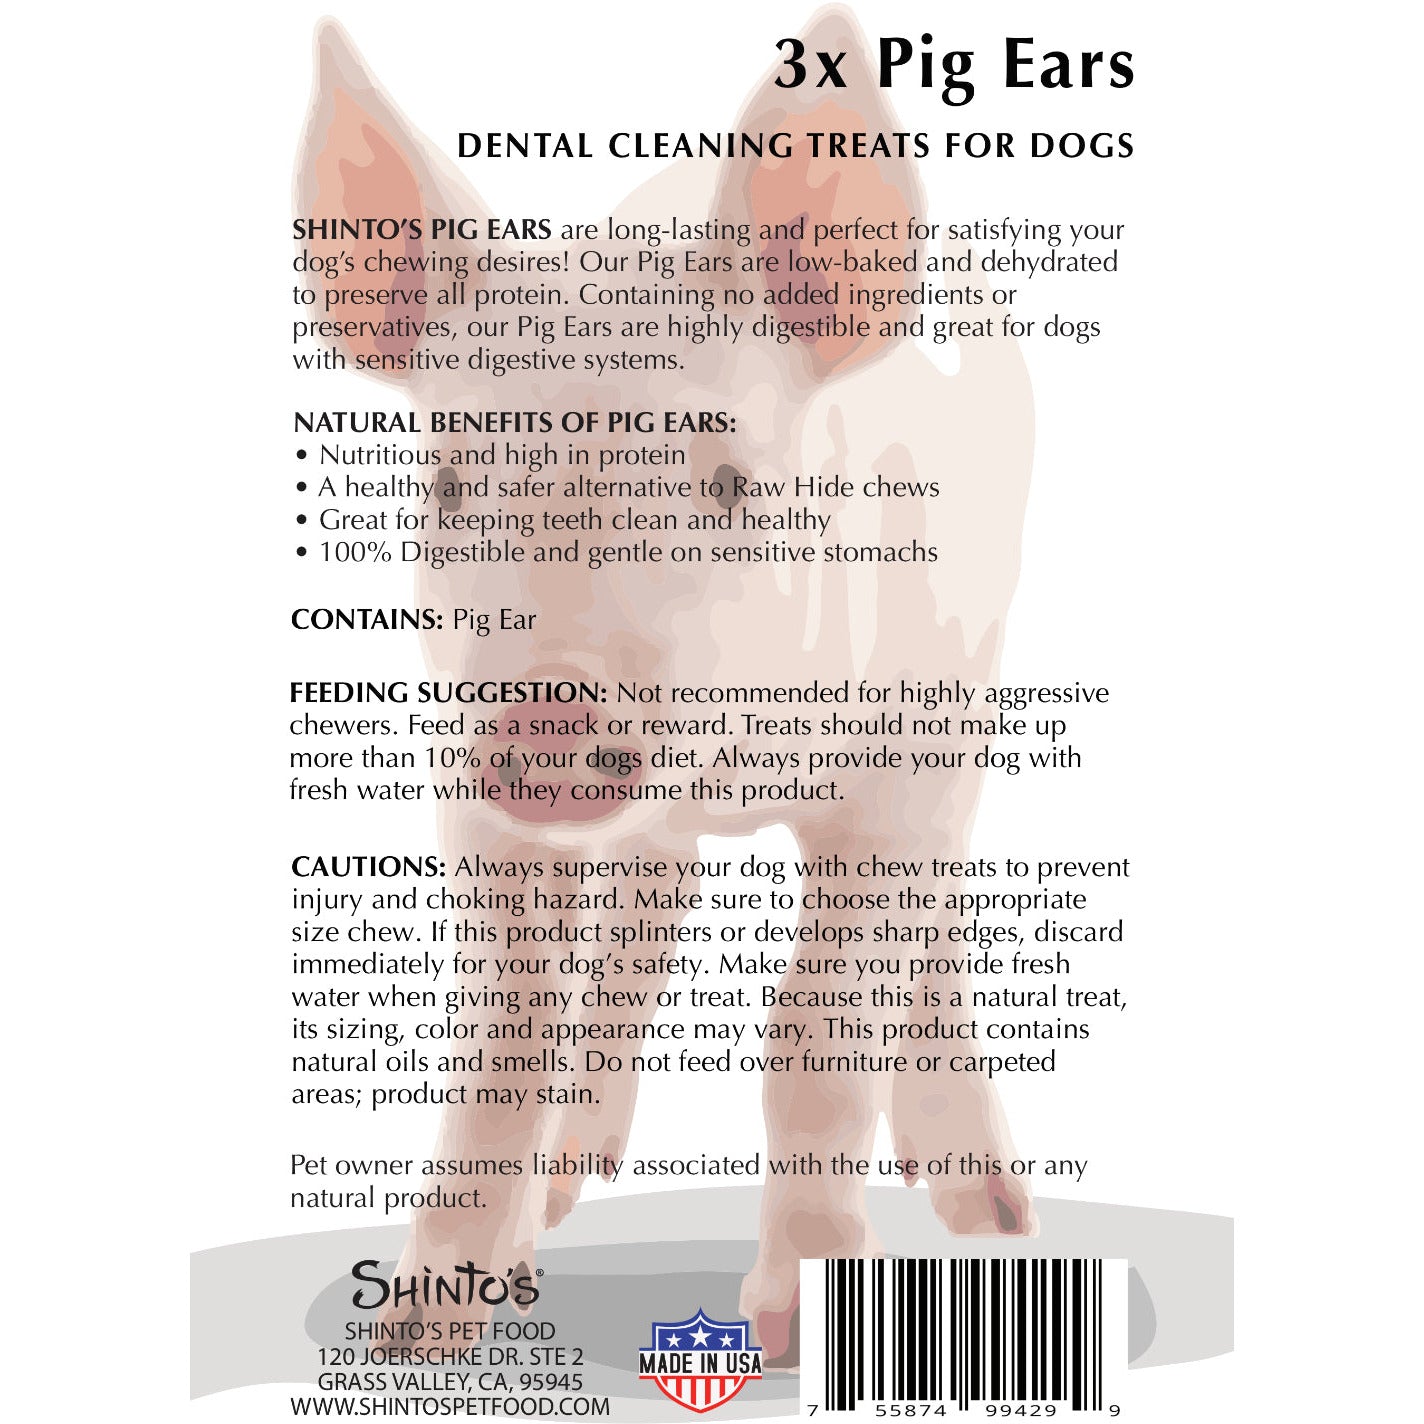 Treats for Dogs - Pig Ears